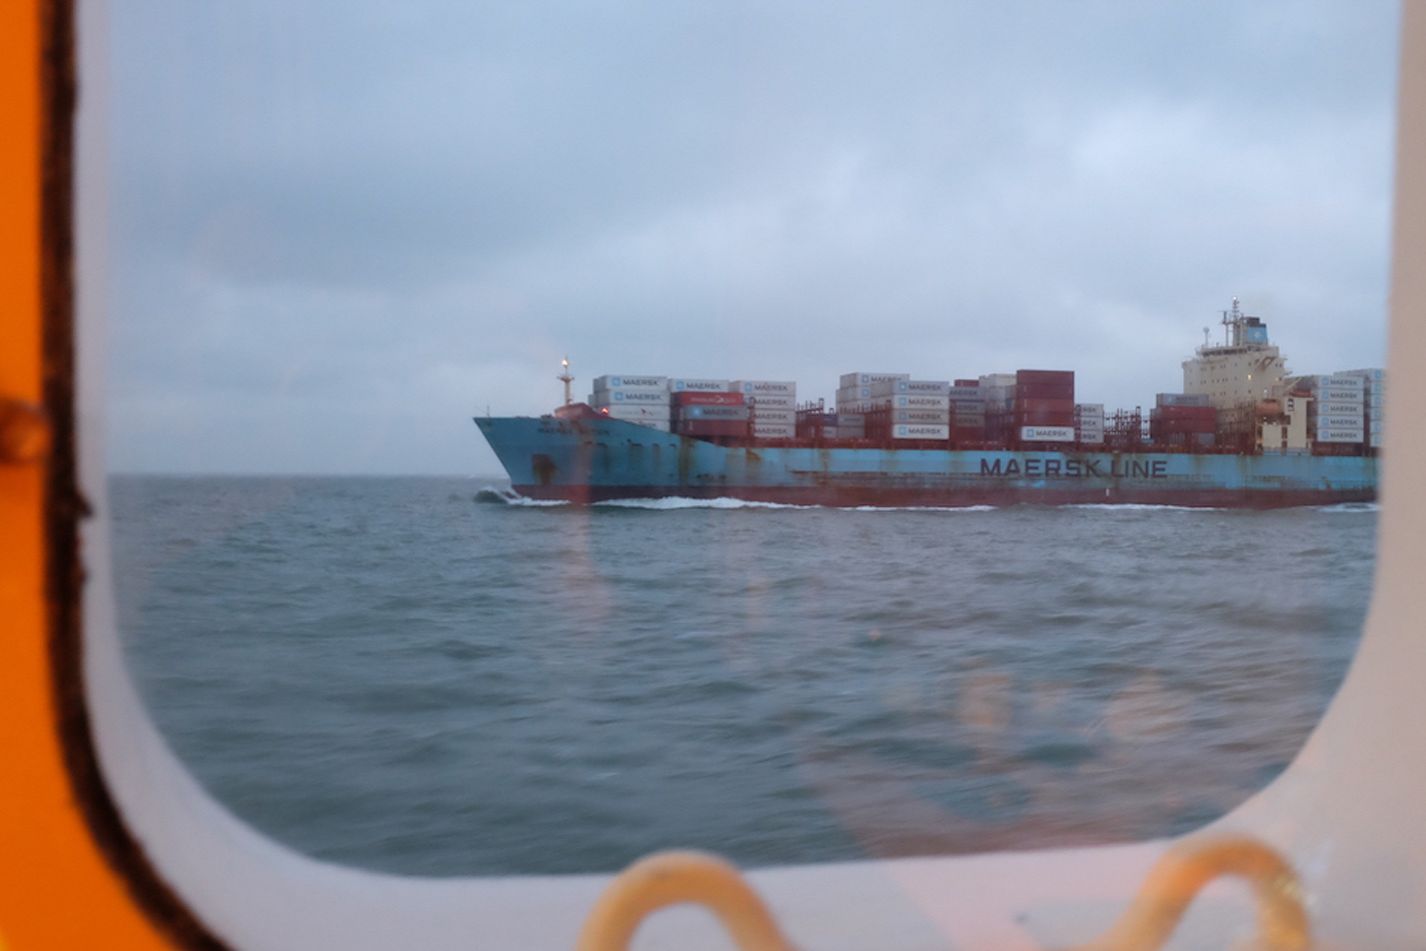 View from the ship's window of a passing container ship